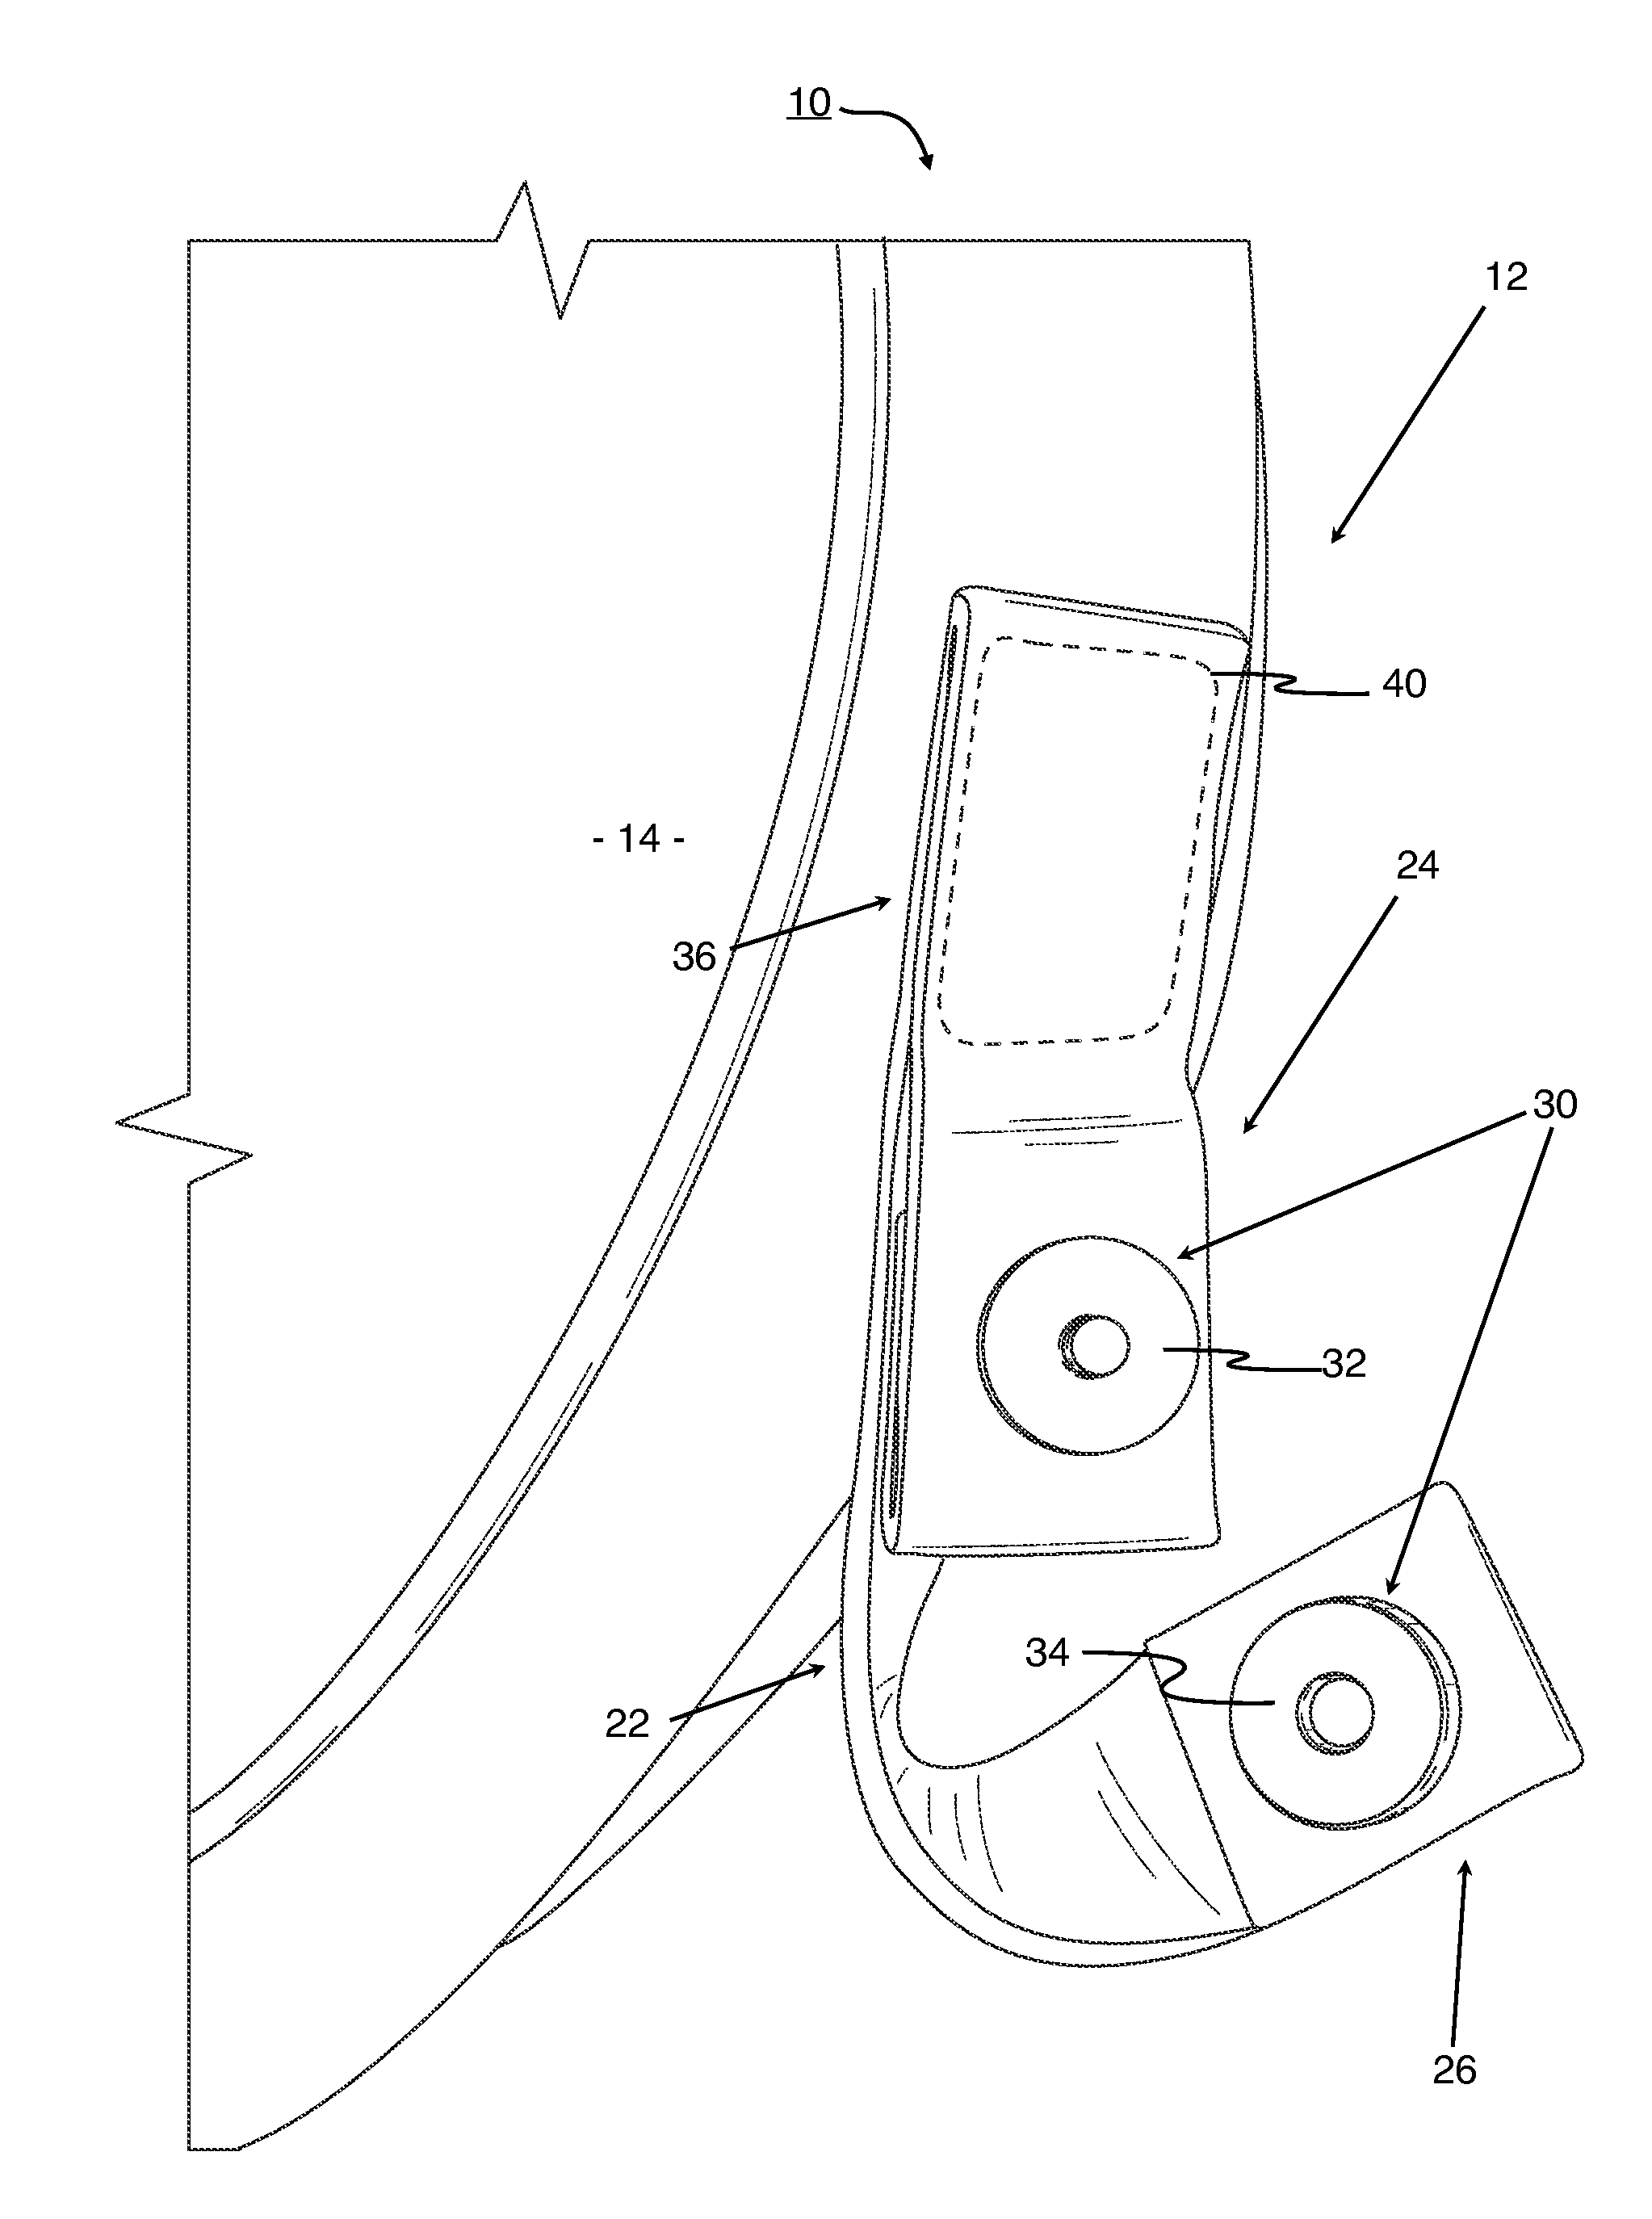 Assembly and Method for Attaching a Seat Cushion to a Chair